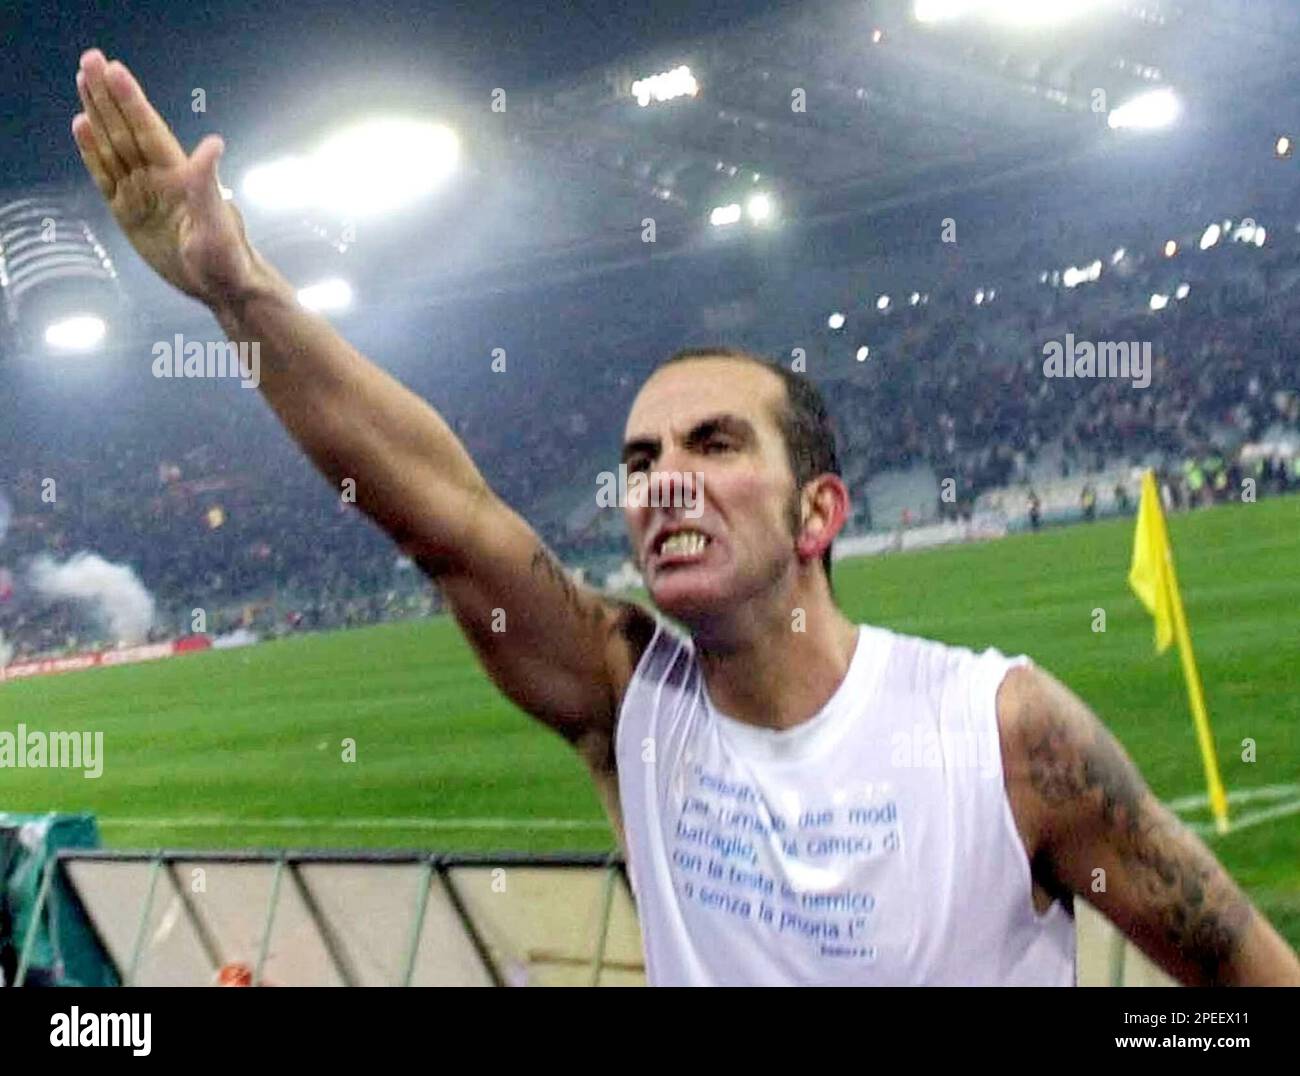 ** FILE ** Lazio's Paolo Di Canio gives a straight-arm salute to supporters, at the end of the Serie A top league soccer match between Lazio and AS Roma at Rome's Olympic stadium, in this Thursday, Jan. 6, 2005 file photo. Italy's soccer federation denounced, Monday, Jan. 24, 2005, Di Canio for "infringing loyalty and correctness principles of sports. (AP Photo/Giuseppe Calzuola) Stock Photo